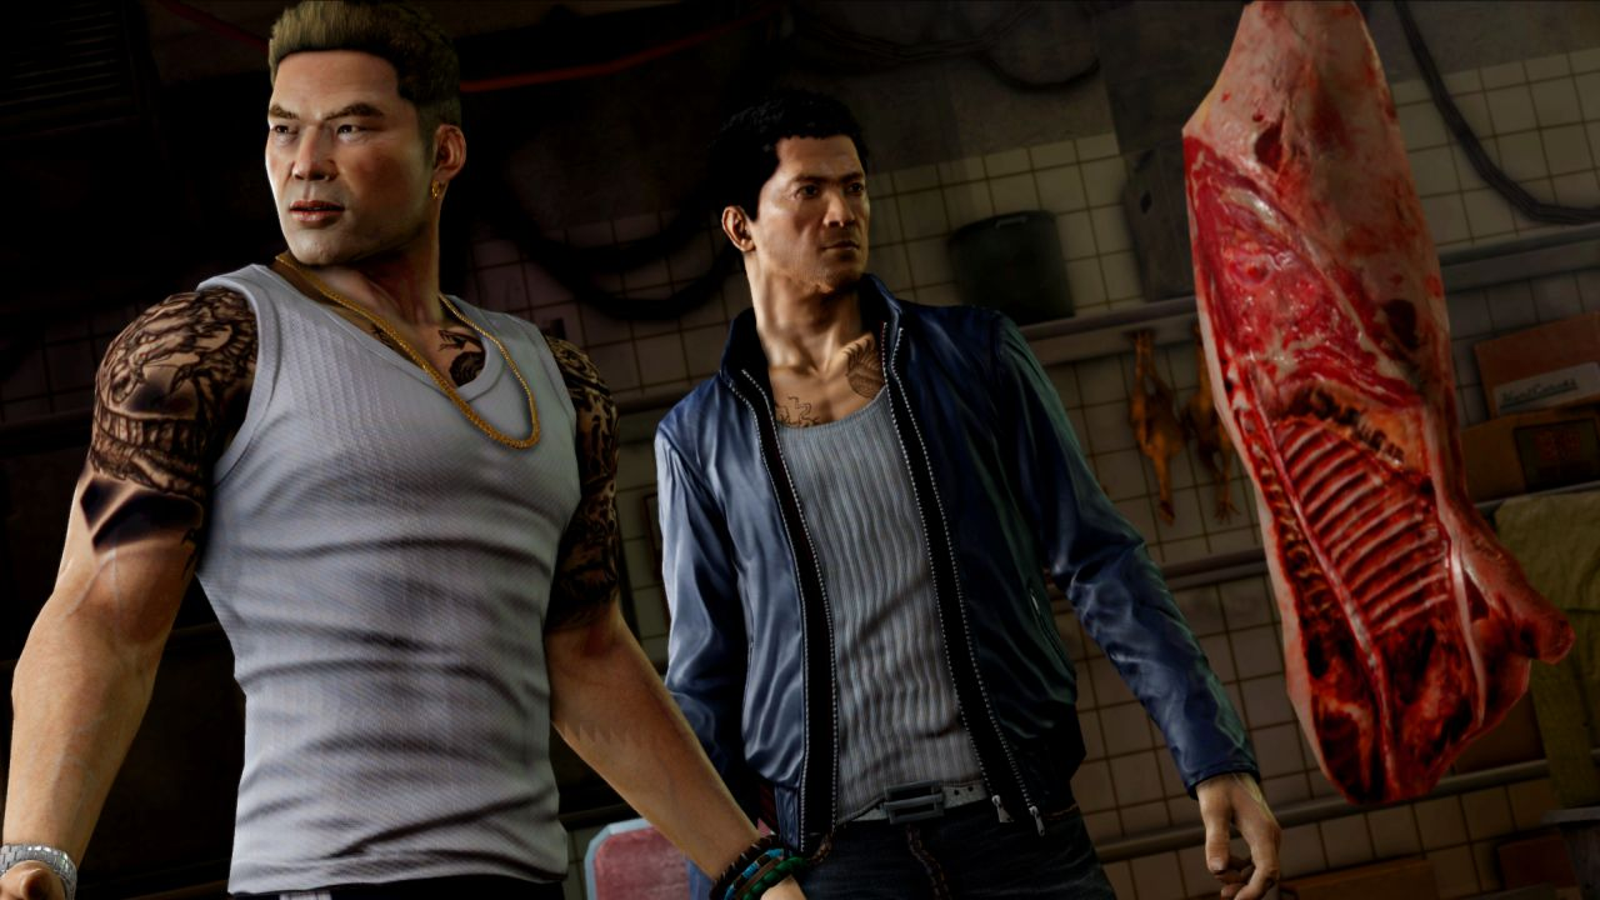 Sleeping Dogs 2 Hopes Put Down as United Front Games Shuts Shop